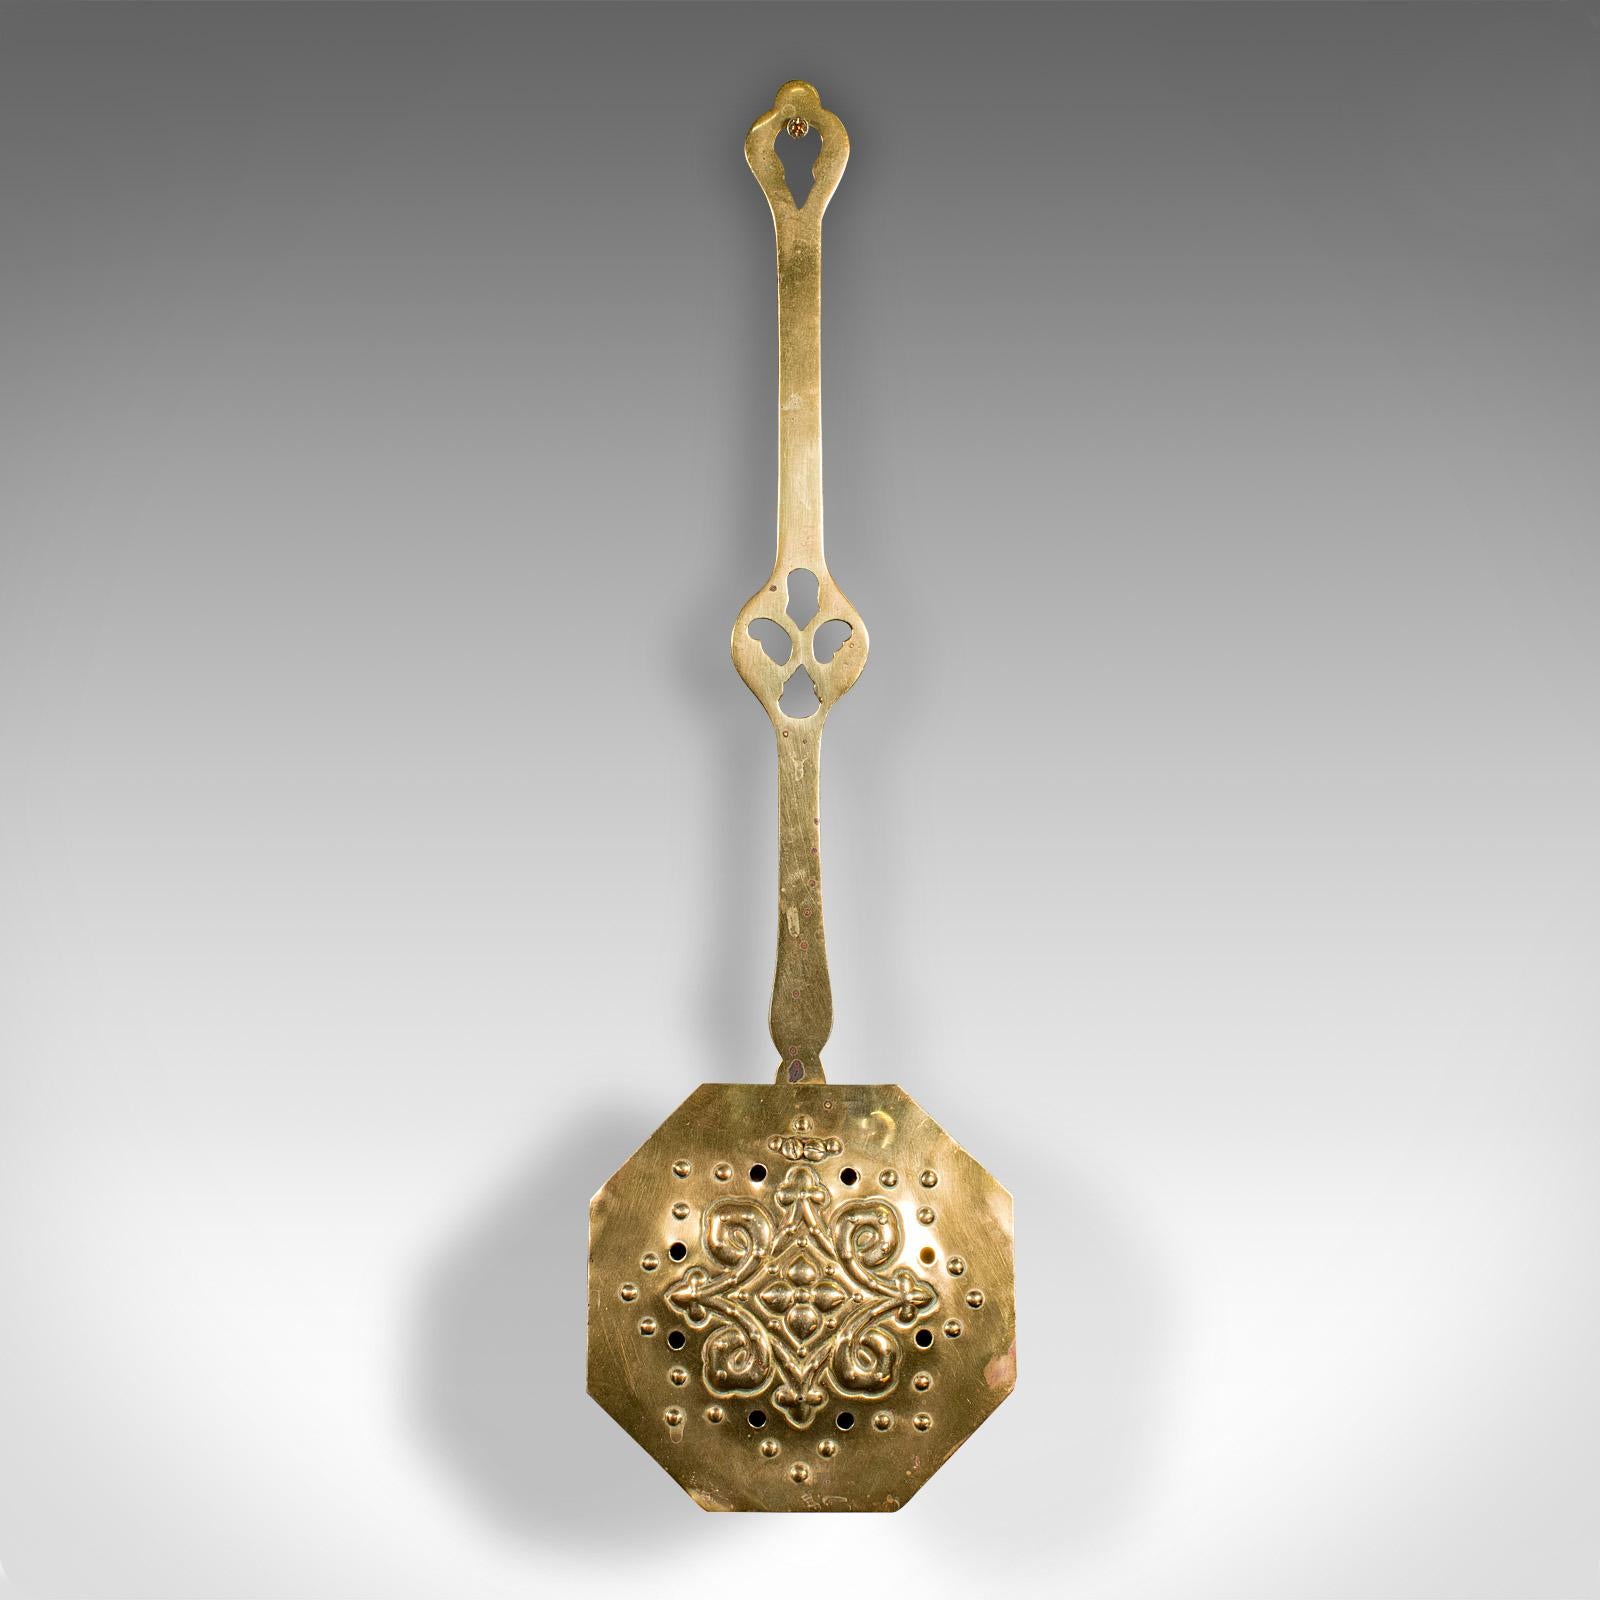 This is an antique chestnut roaster. An English, brass hanging warmer, dating to the Georgian period, circa 1800.

Appealing chestnut warmer with tasteful decor
Displaying a desirable aged patina throughout
Brass presents golden tonality with